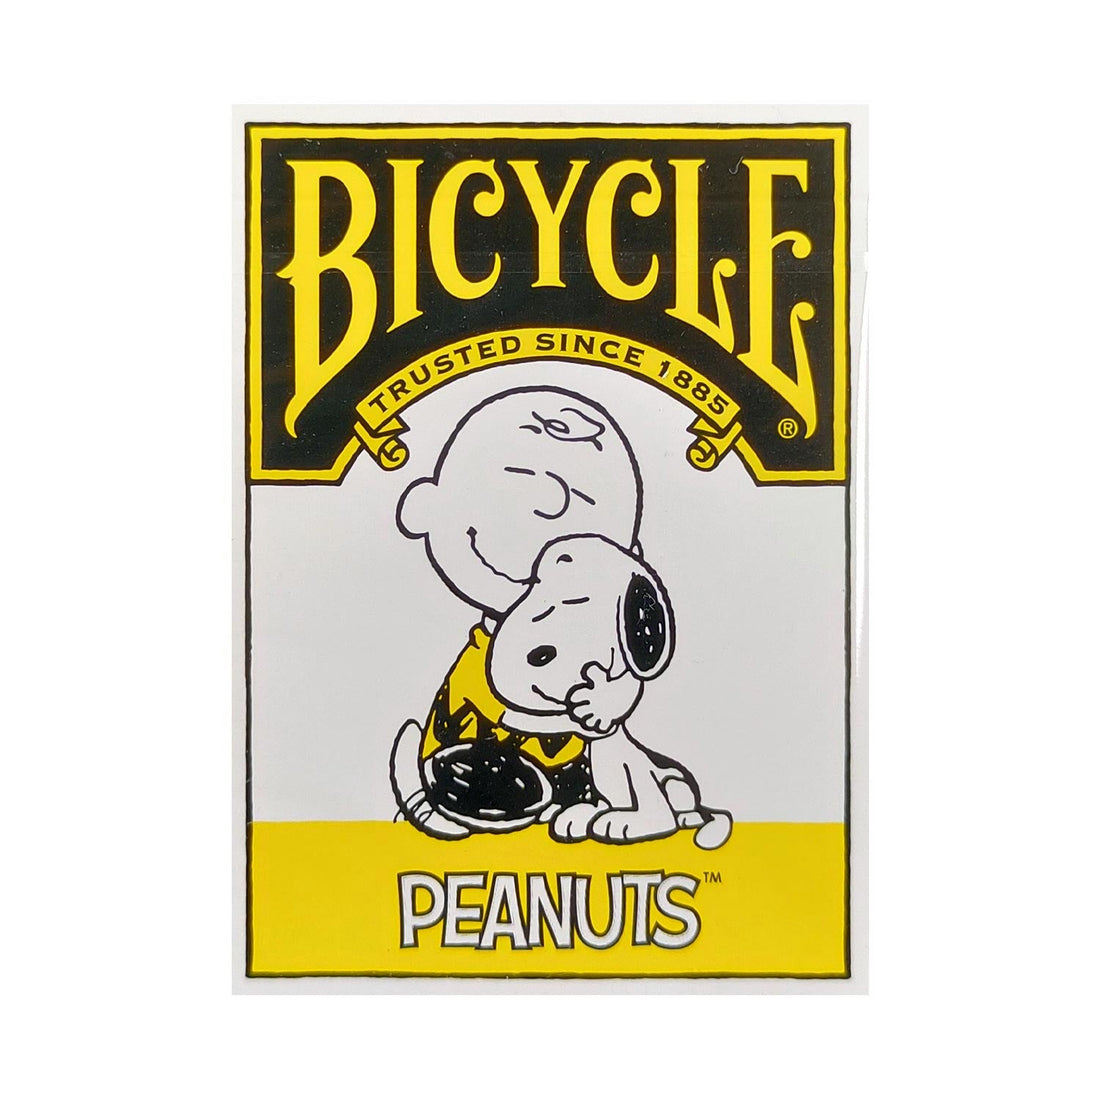 Bicycle Peanuts Everyday Playing Cards